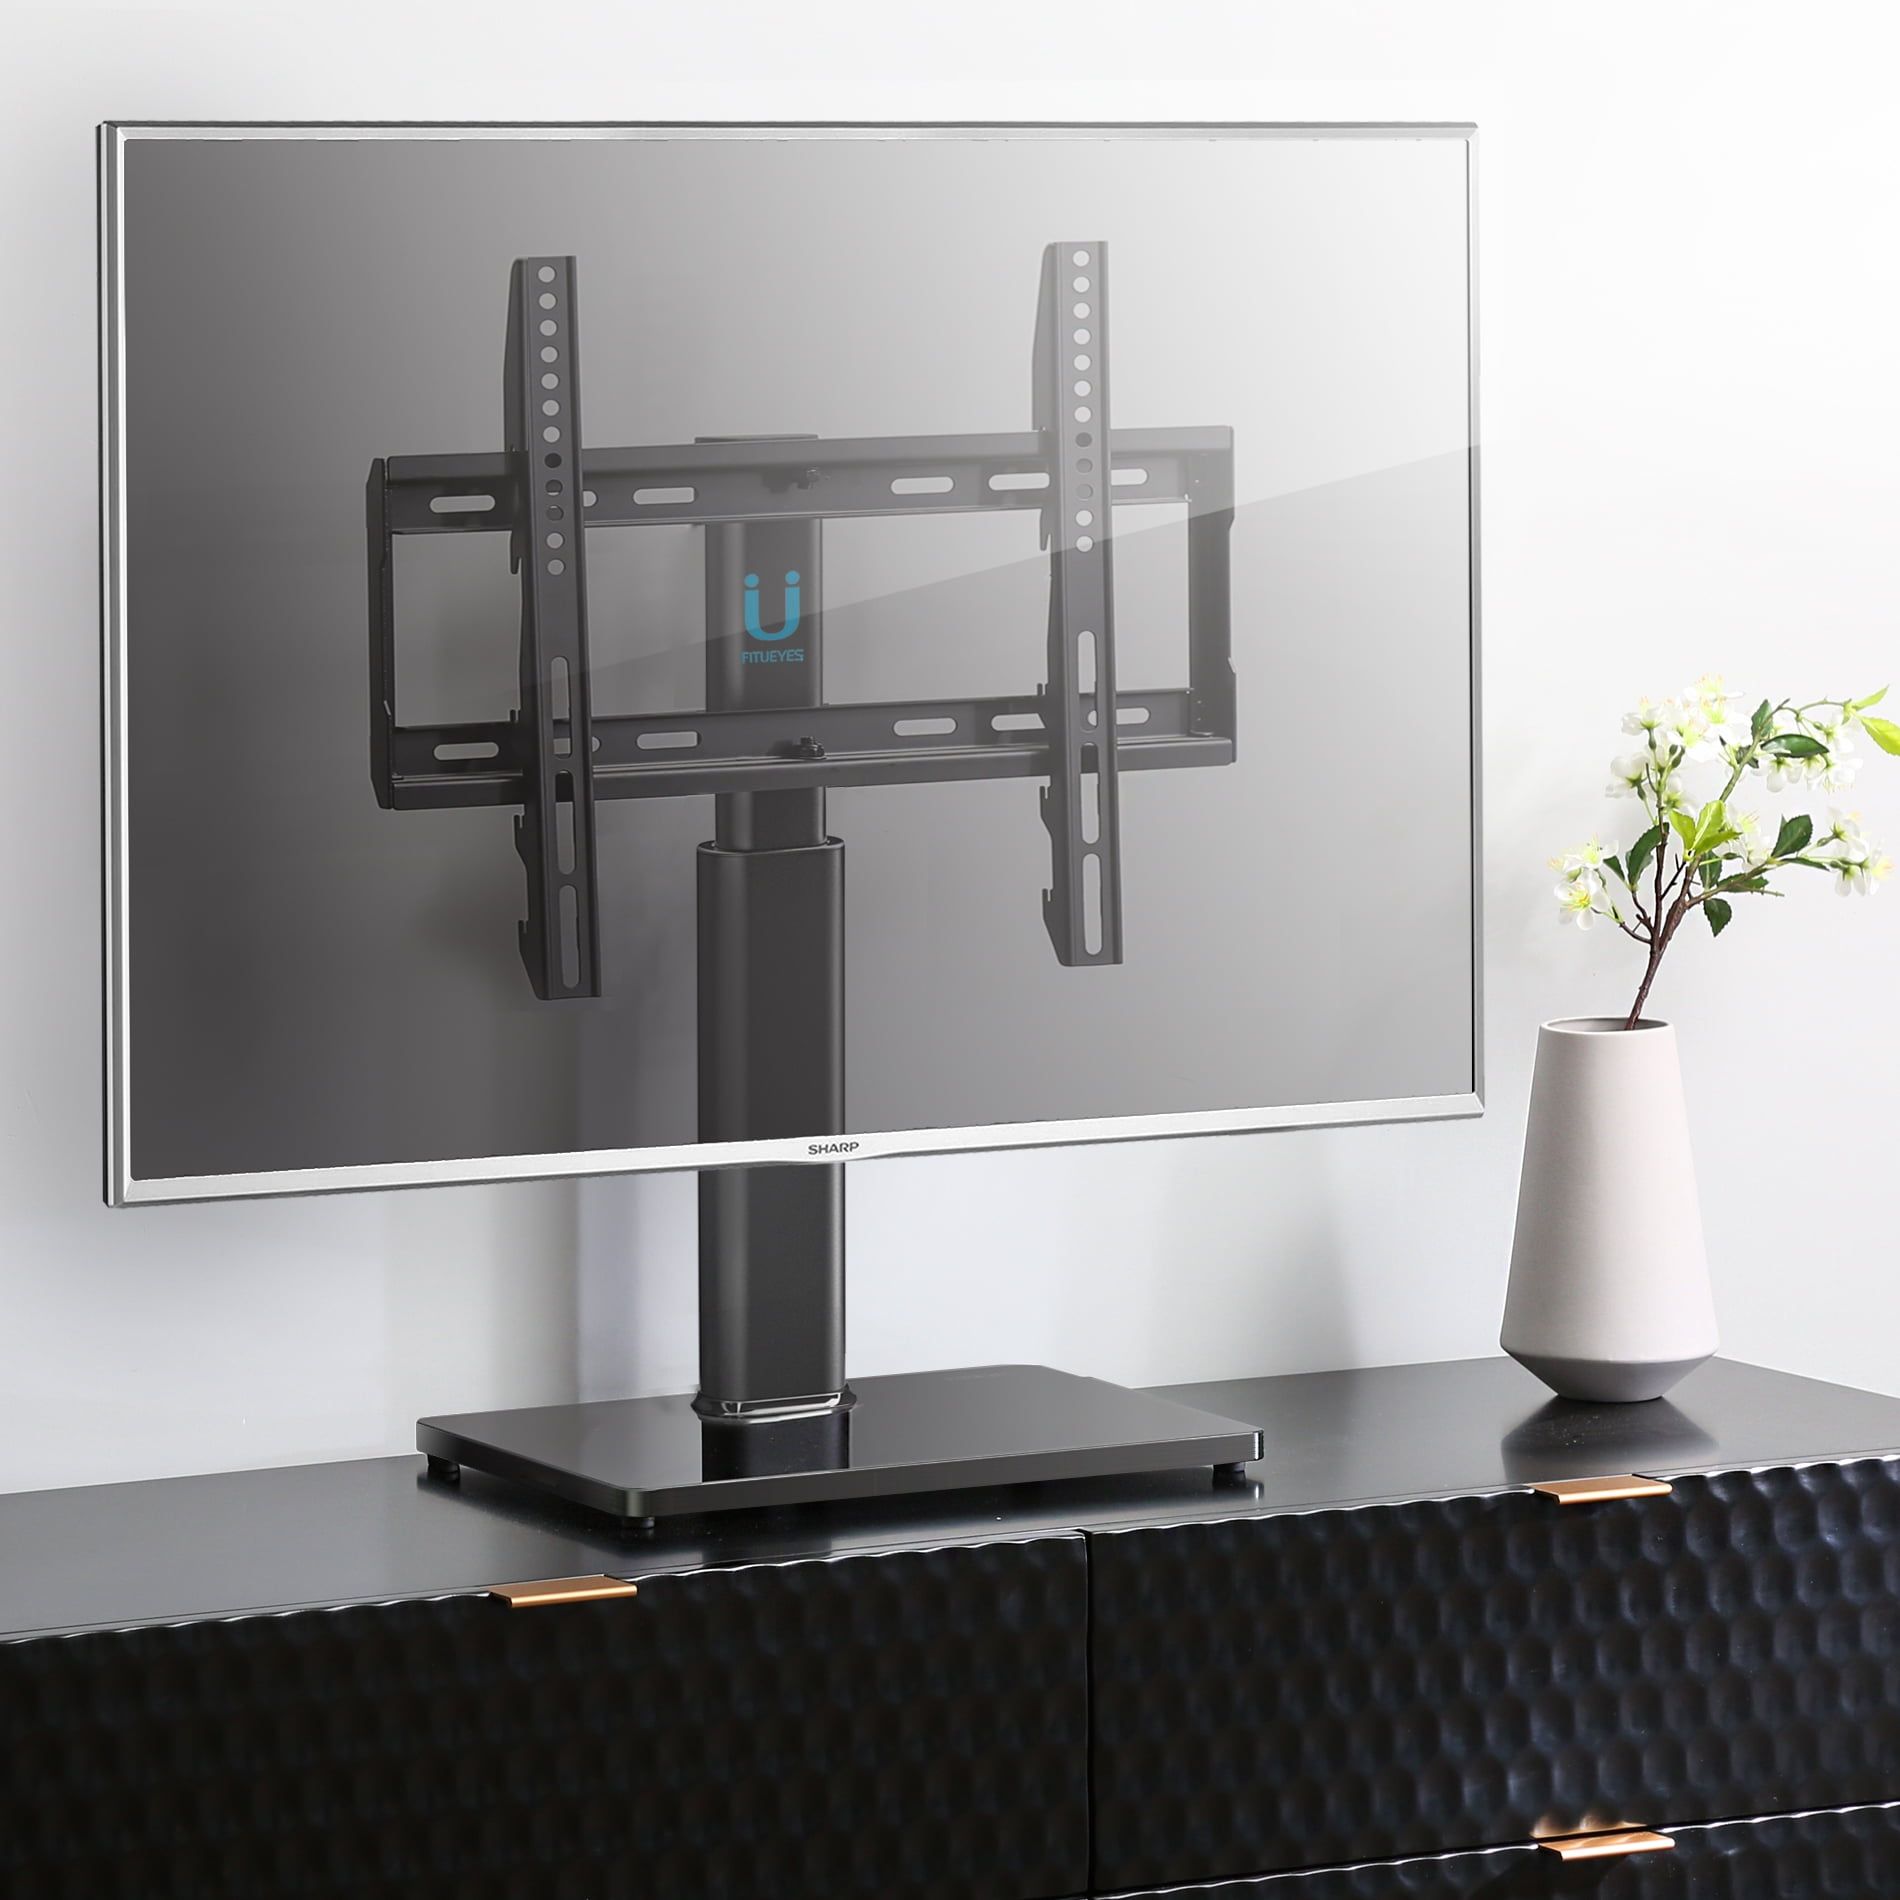 Fitueyes Swivel Tv Stand With Mount For Up To 50 Inch Samsung Vizio Led Throughout Led Tv Stands With Outlet (Gallery 13 of 20)